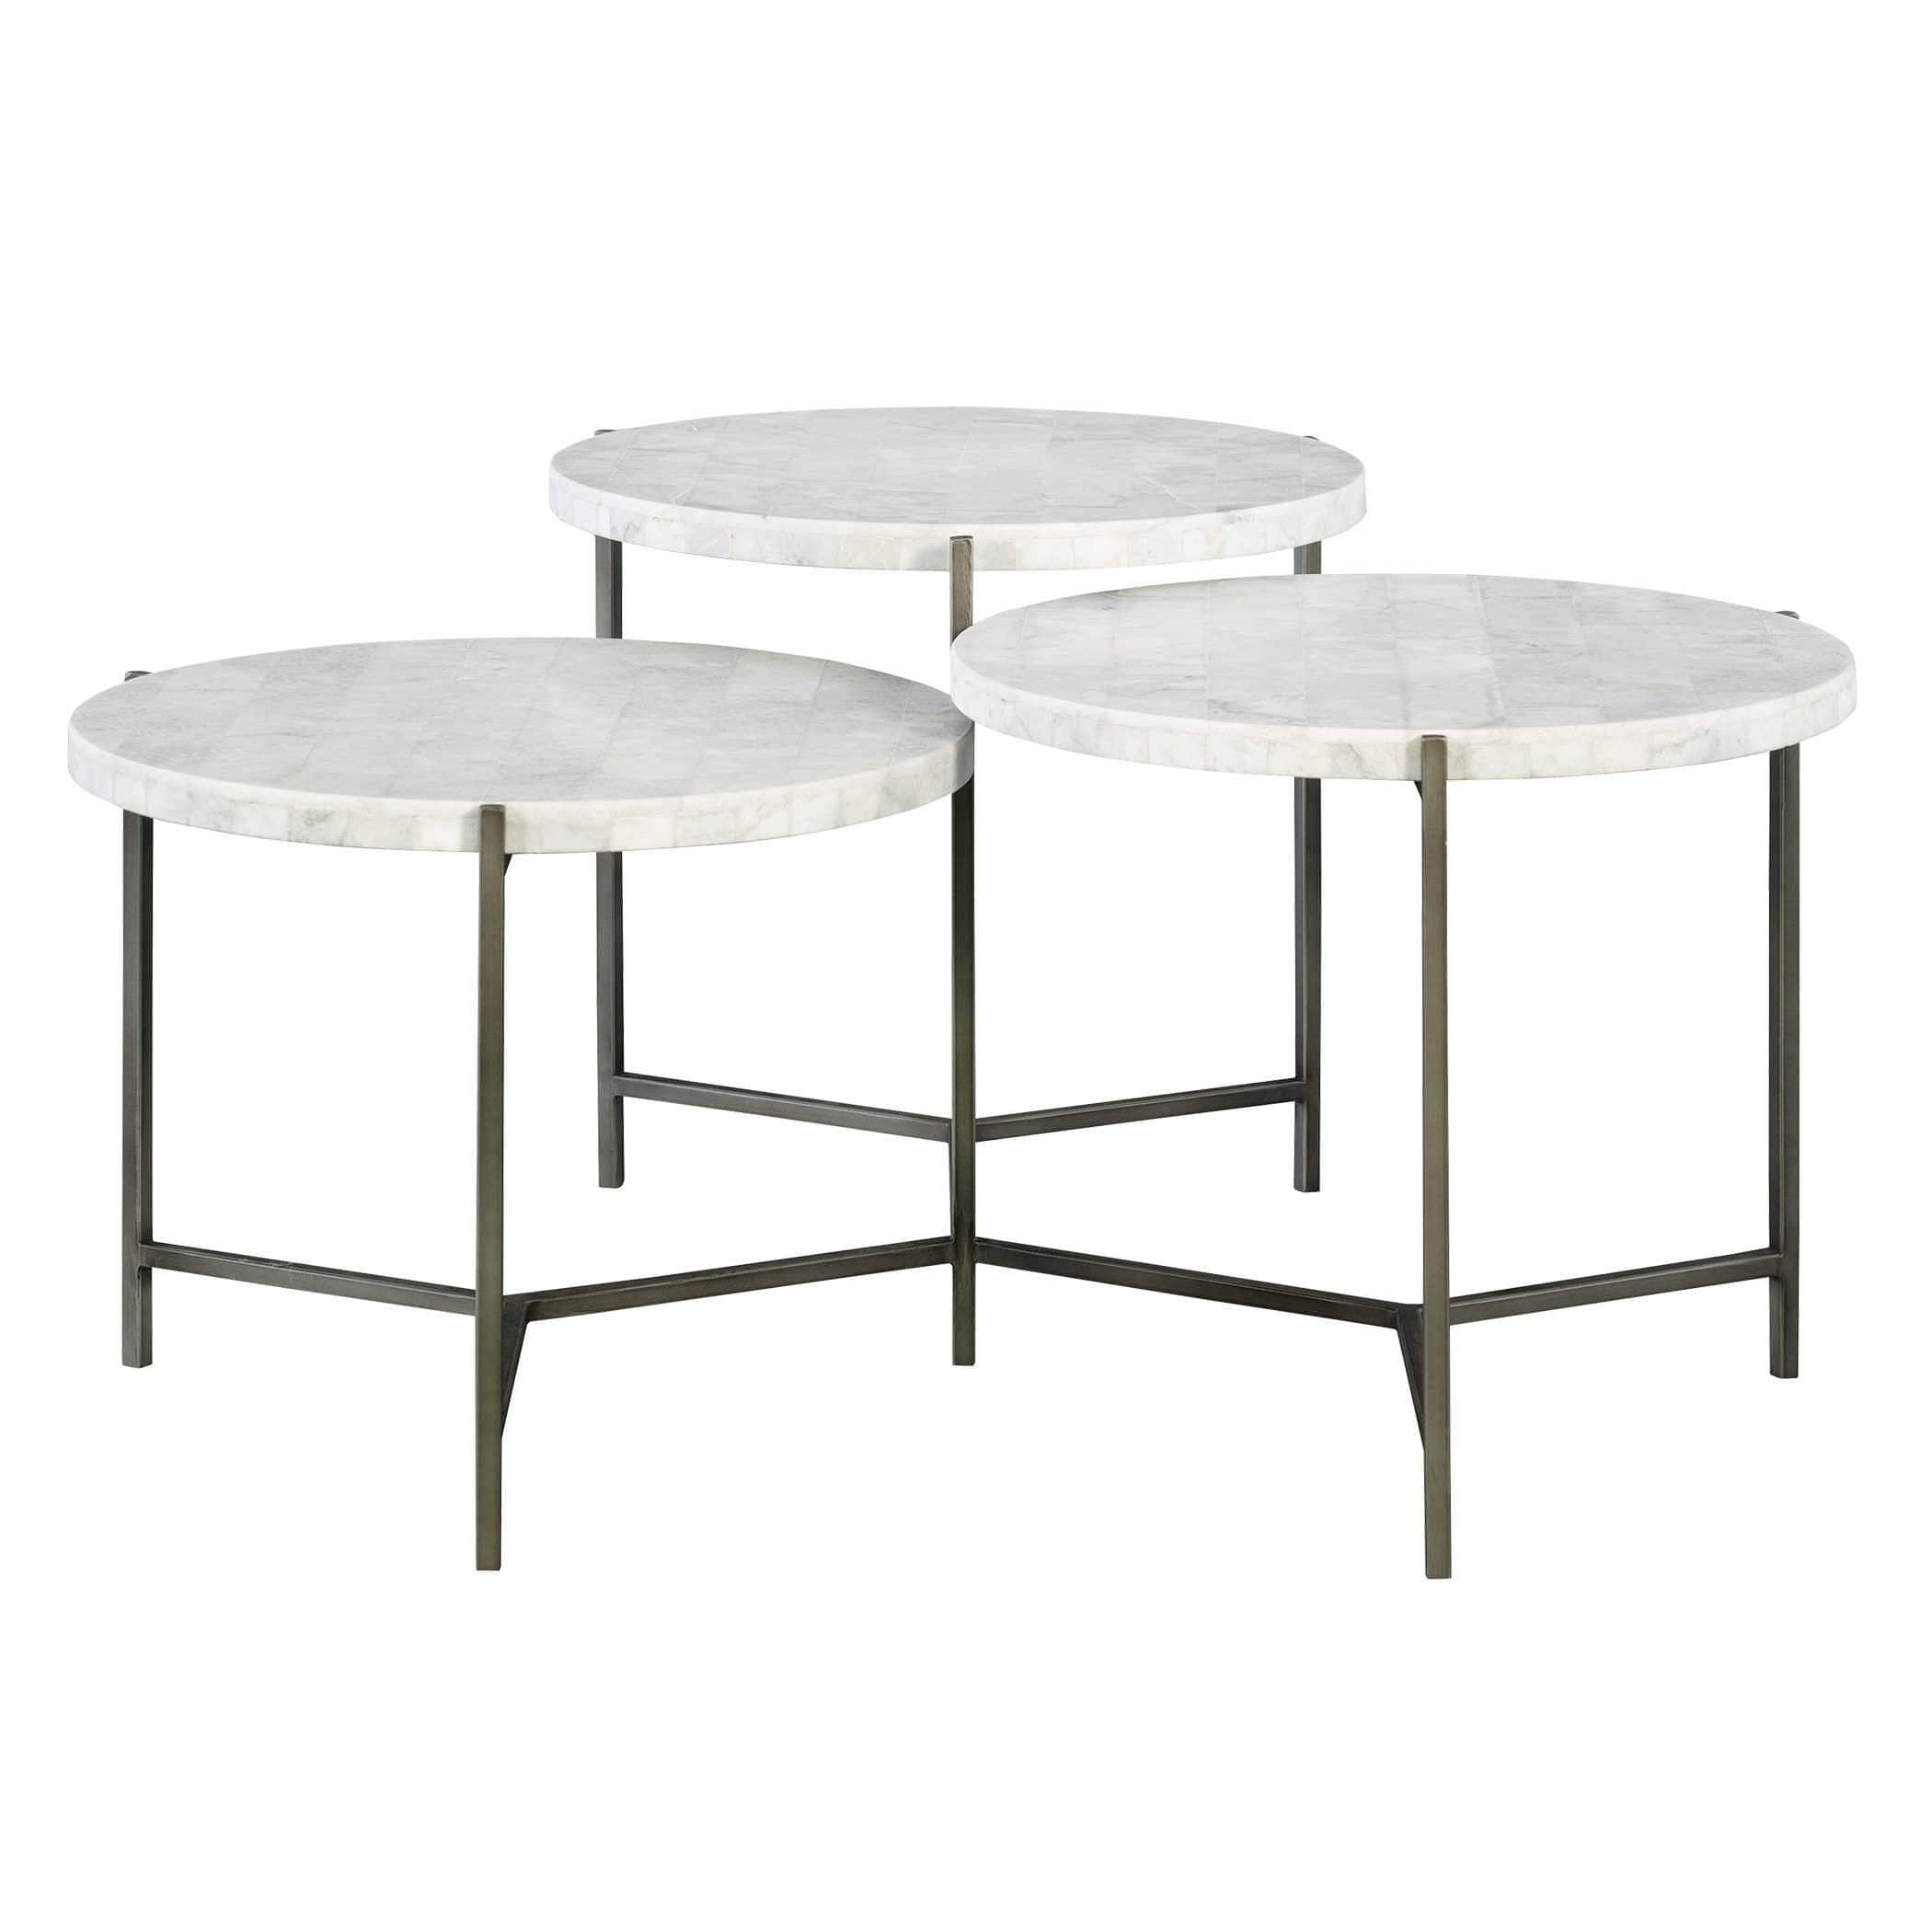 Contarini Tiered Coffee Table Uttermost